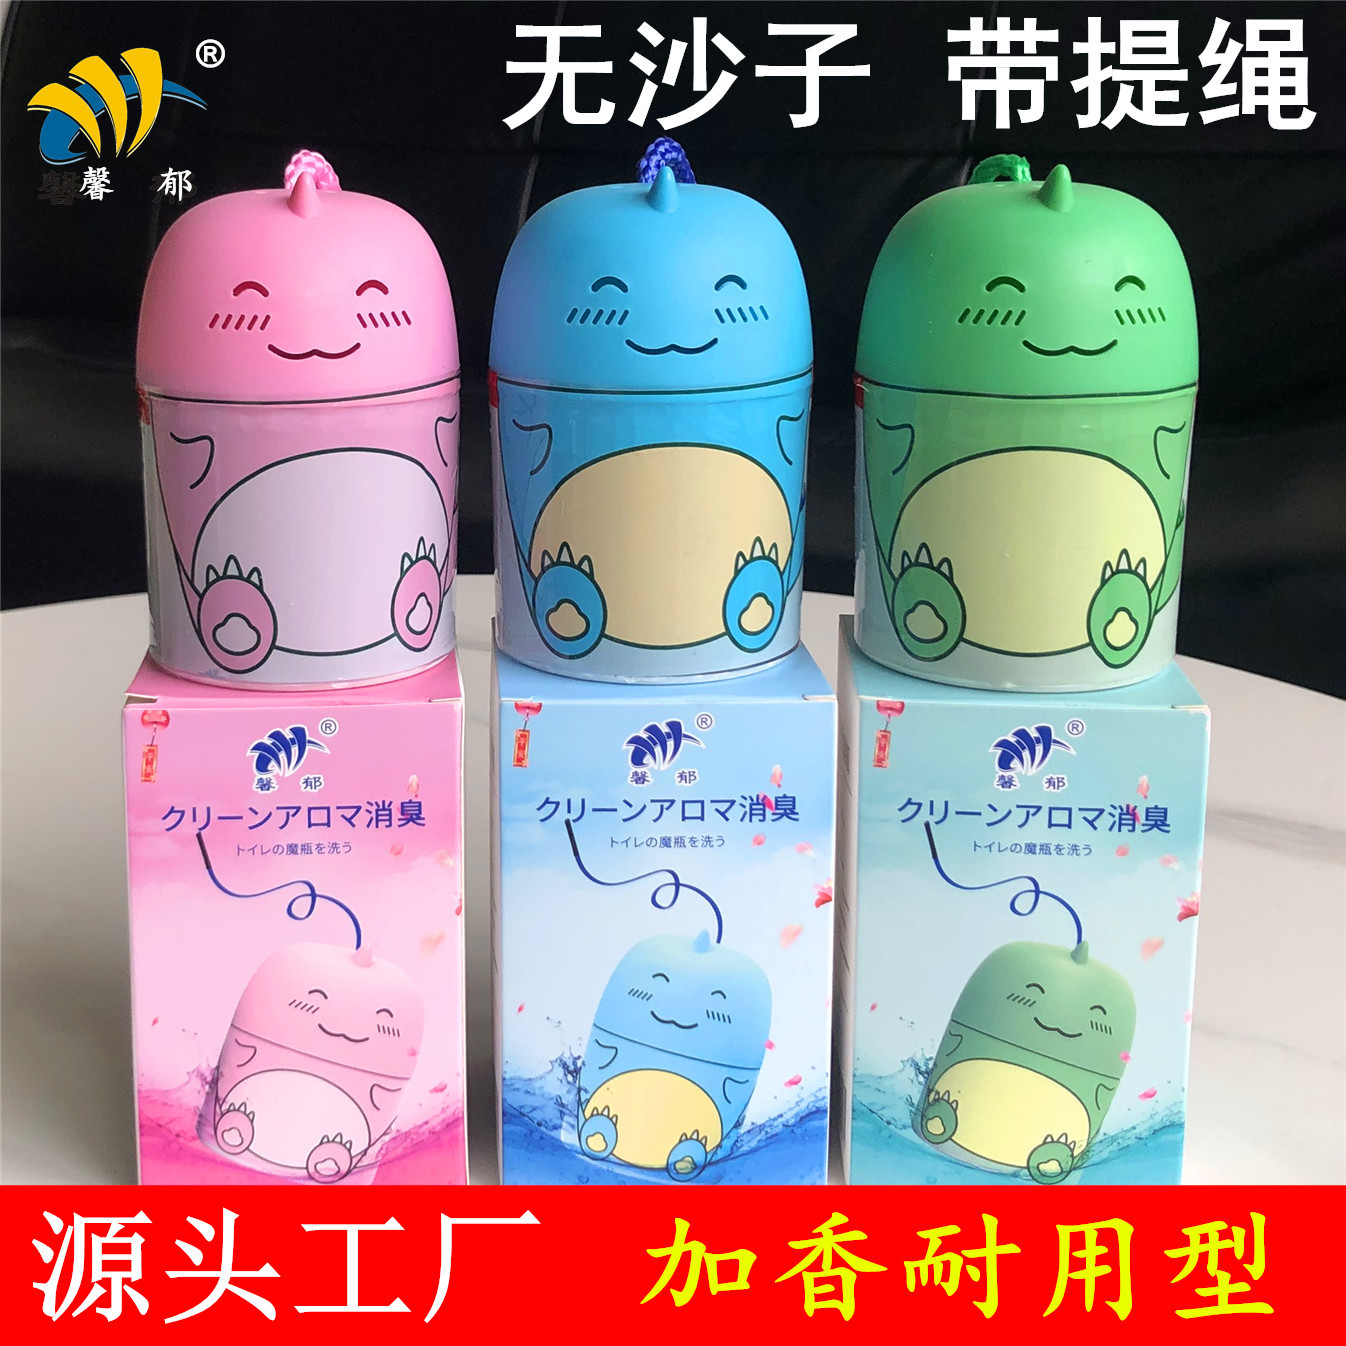 Xinyu small dinosaur toilet automatic cl...